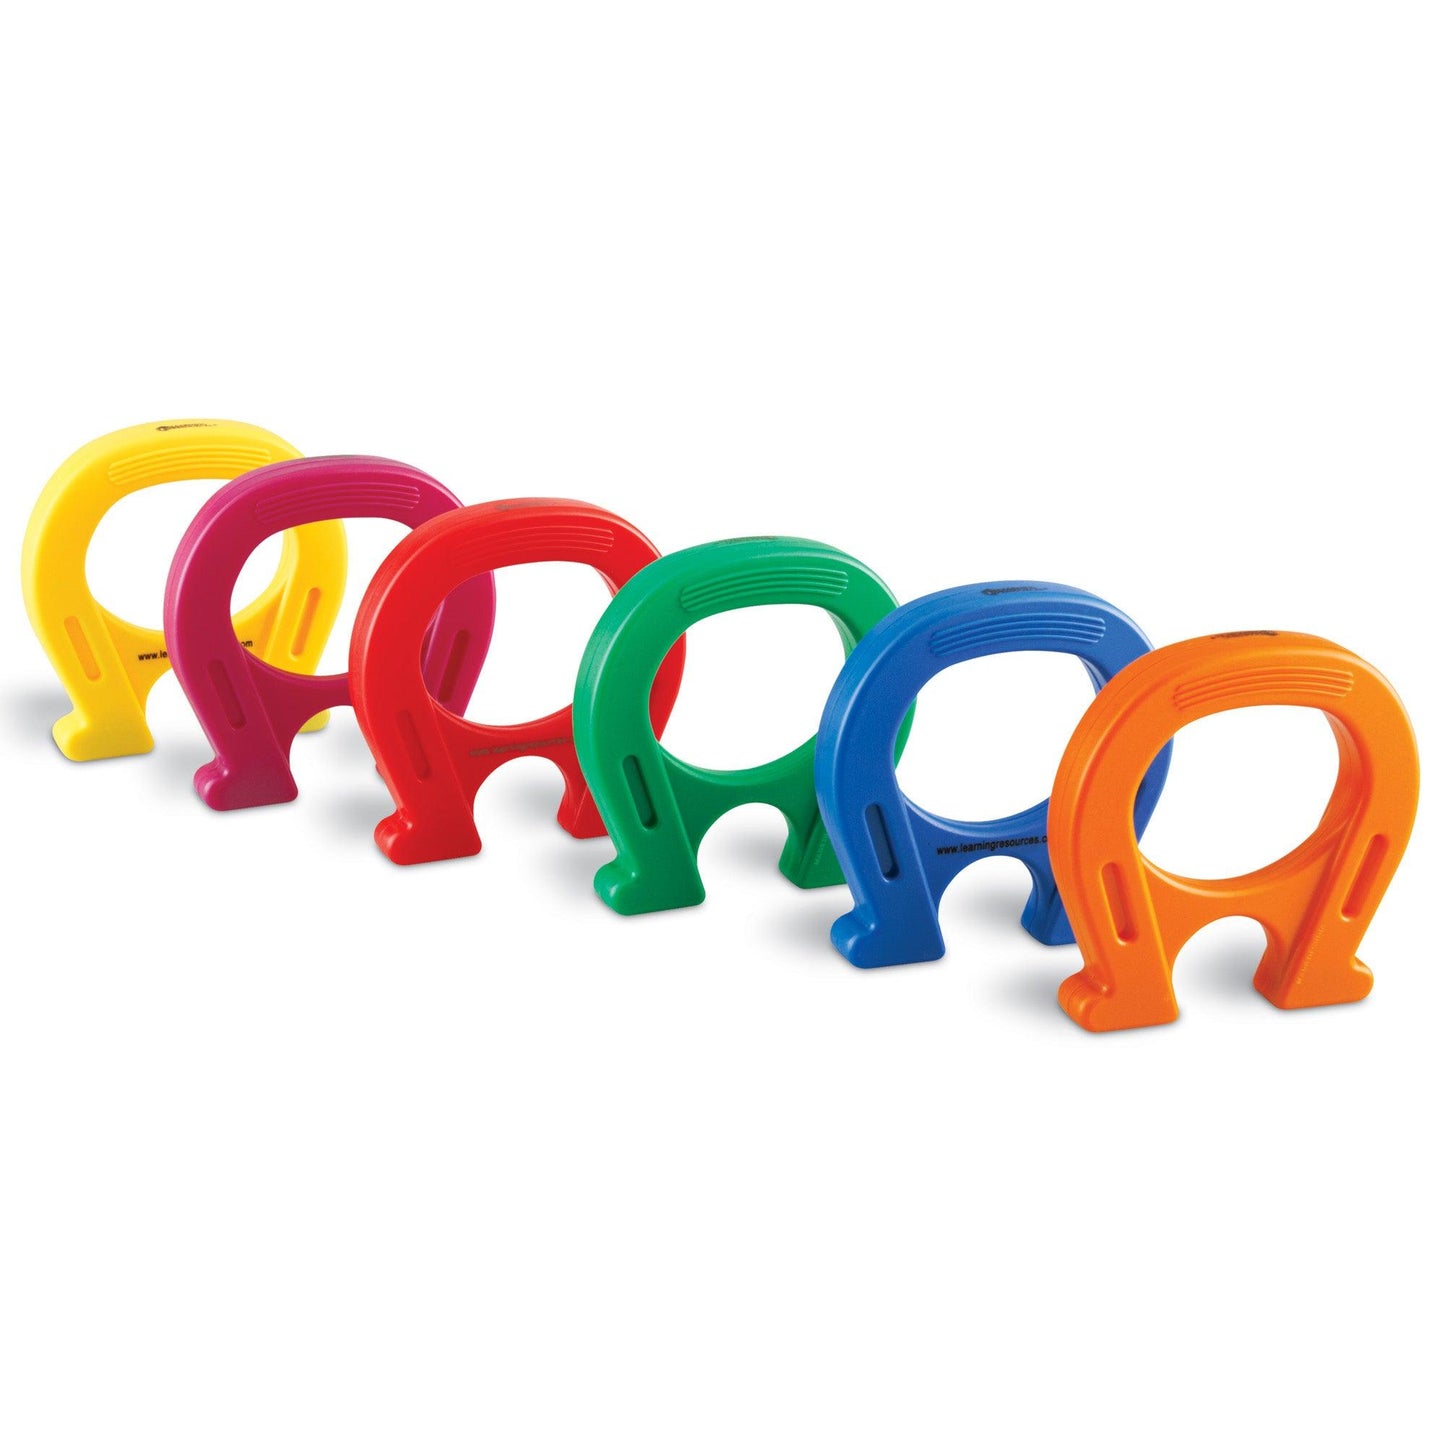 Primary Science 5" Mighty Magnets, Set of 6 - Loomini